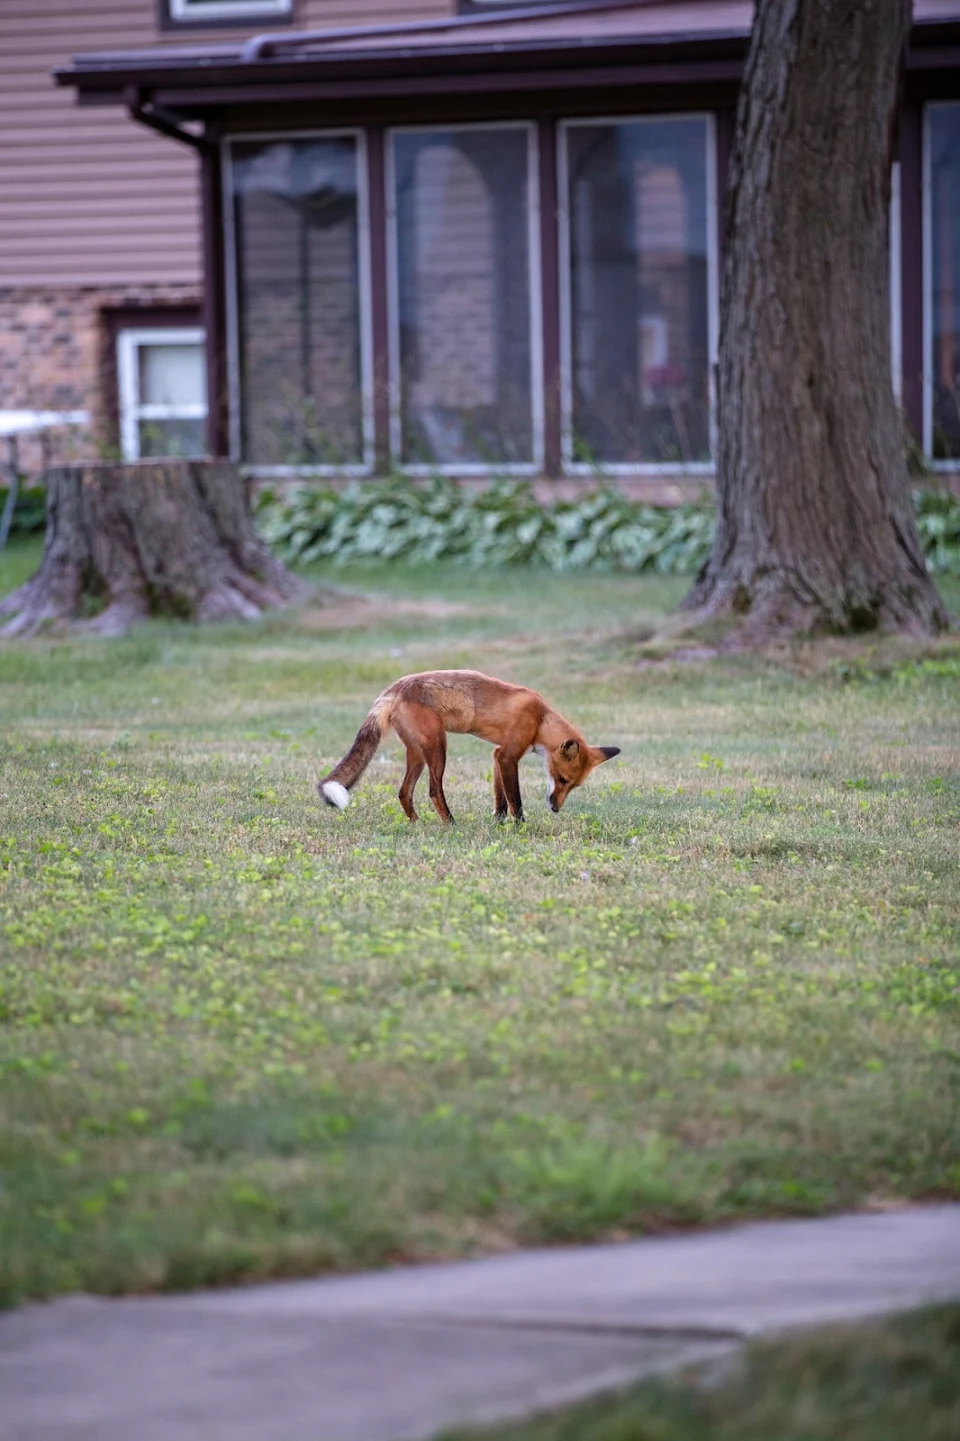 Can foxes be rare puppers? This guy is doing a great job of pest control in our neighborhood